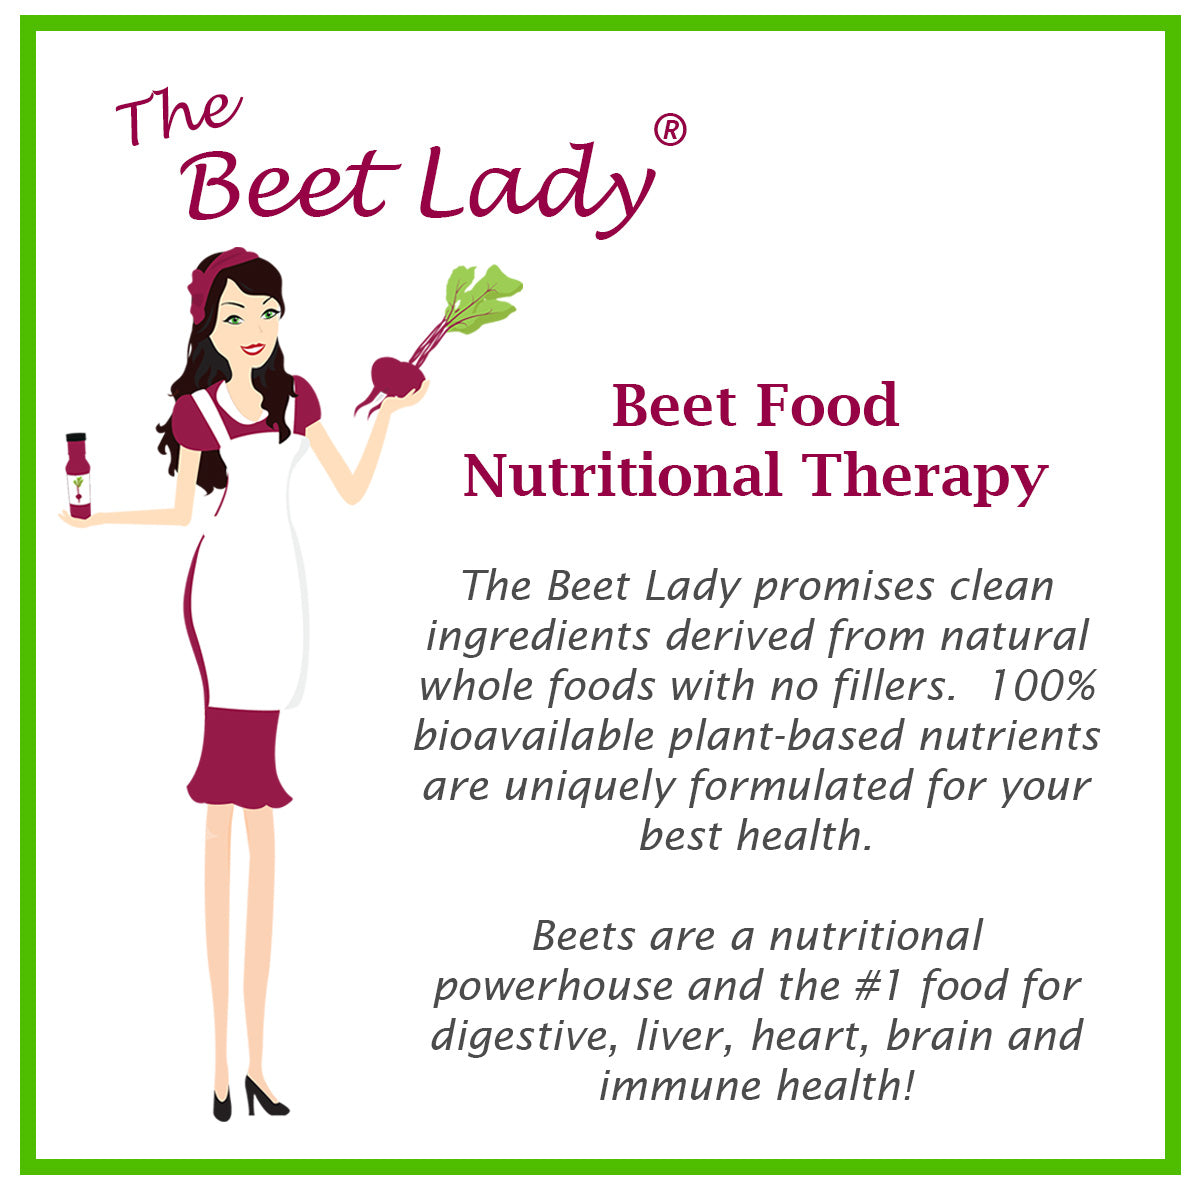 The Beet Lady Beet Food Nutritional Therapy powder blends